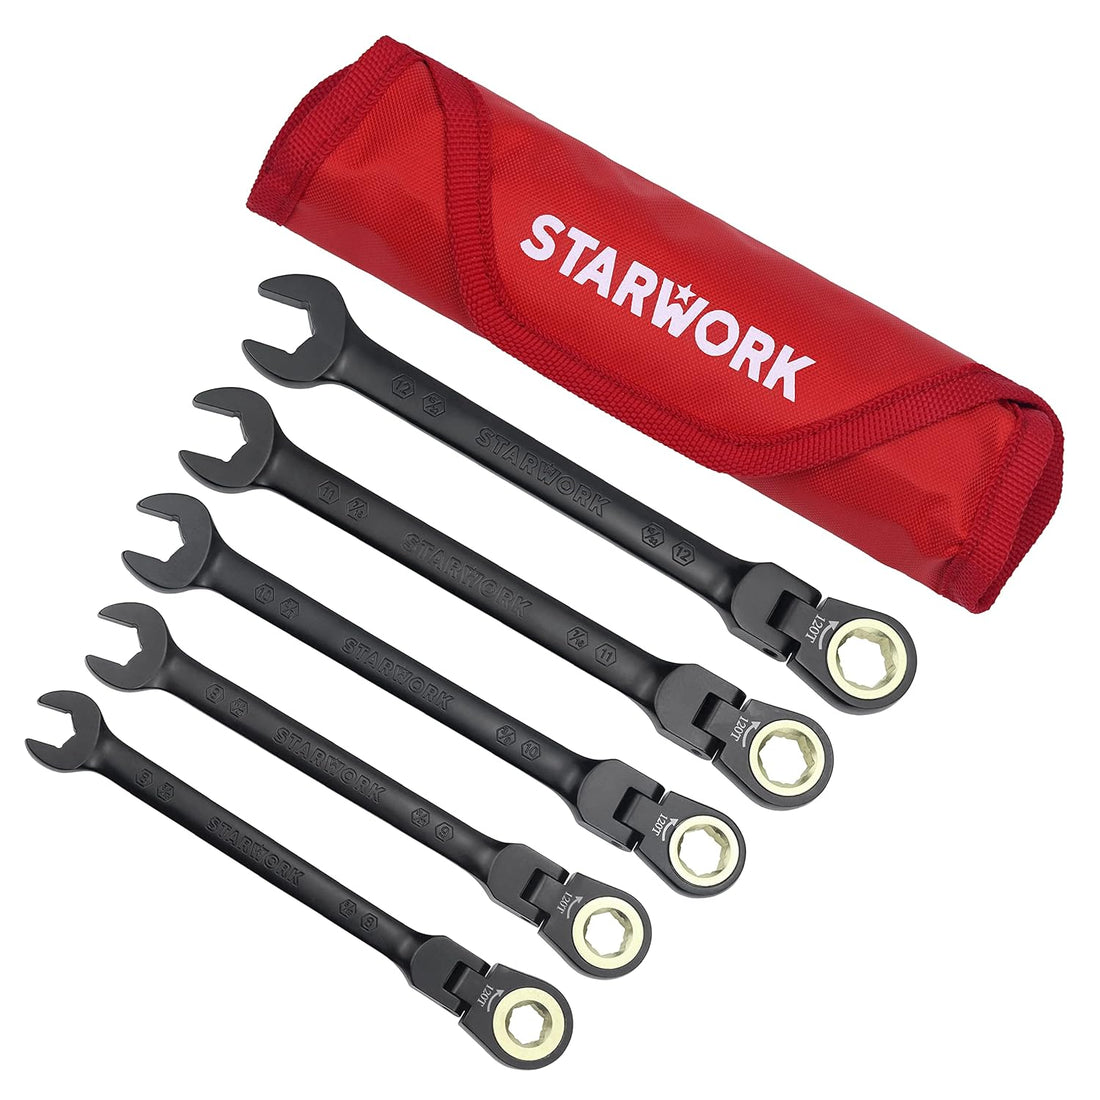 STARWORK TRUE MECHANIC™ 5Pc. 120T SAE&Metric Flexible Ratcheting Wrench Set, Professional, With Roll-Up Pouch Bag